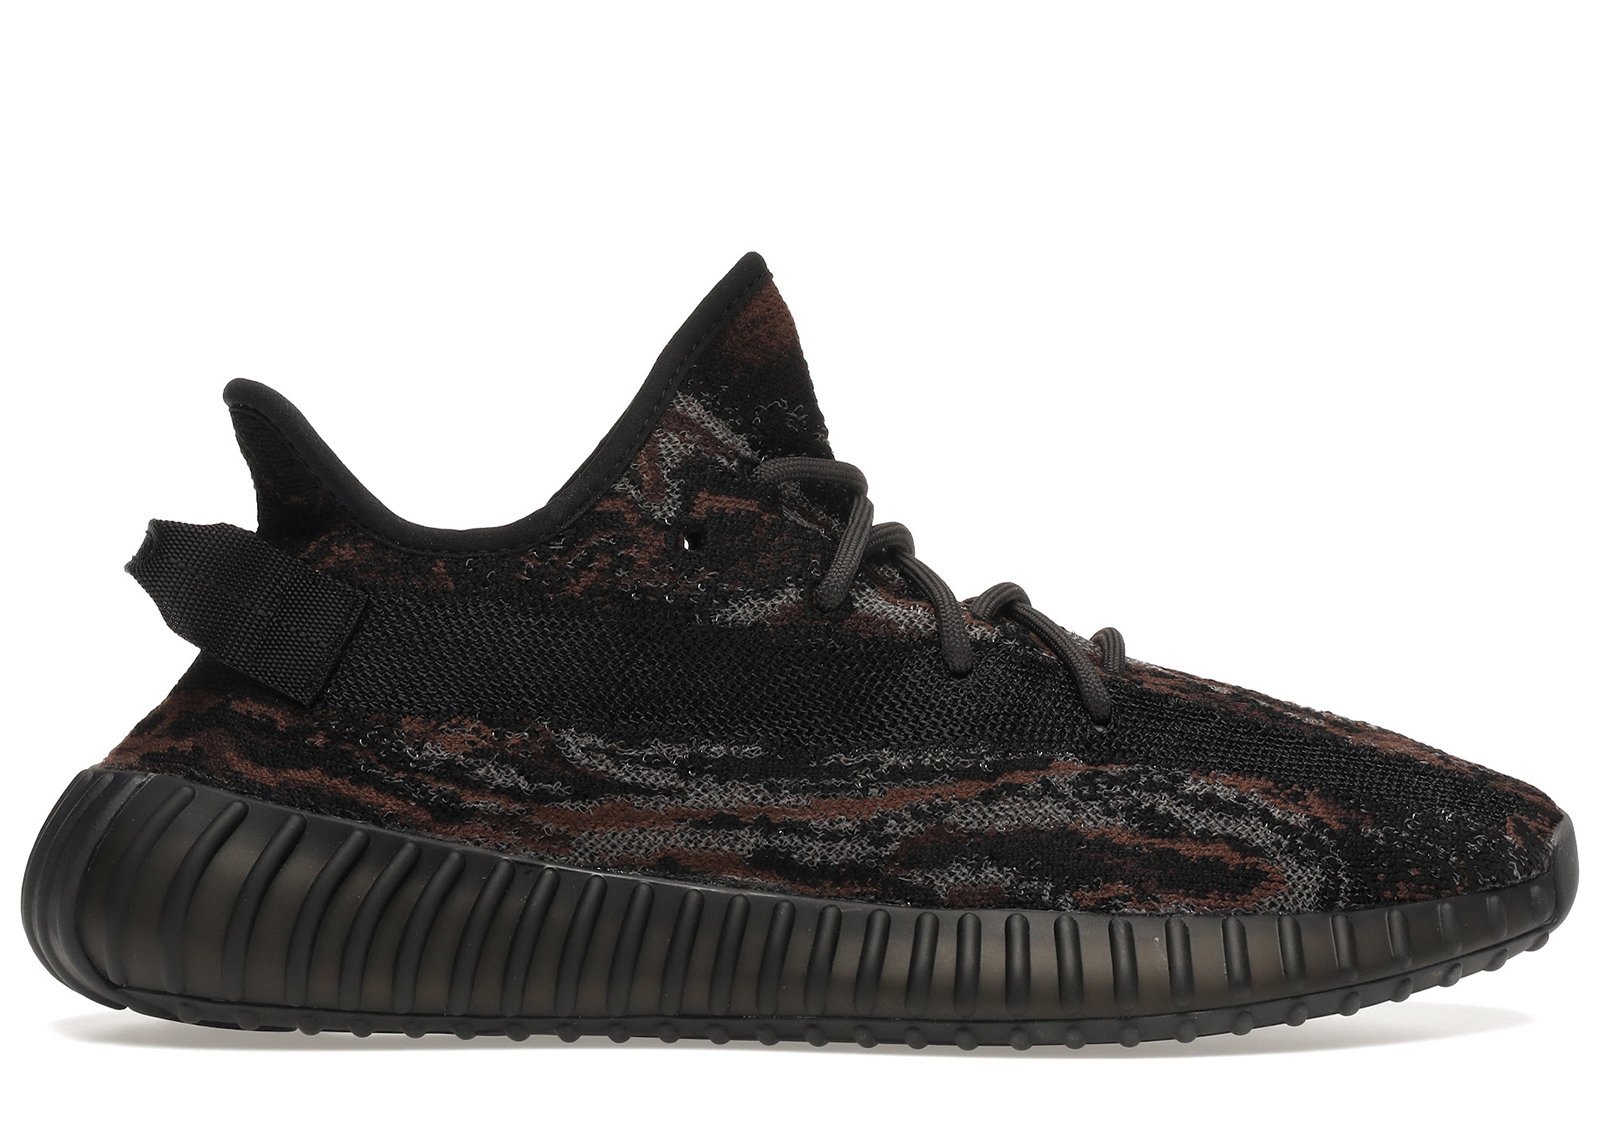 adidas Yeezy Boost 350 V2 MX Rock sneakers